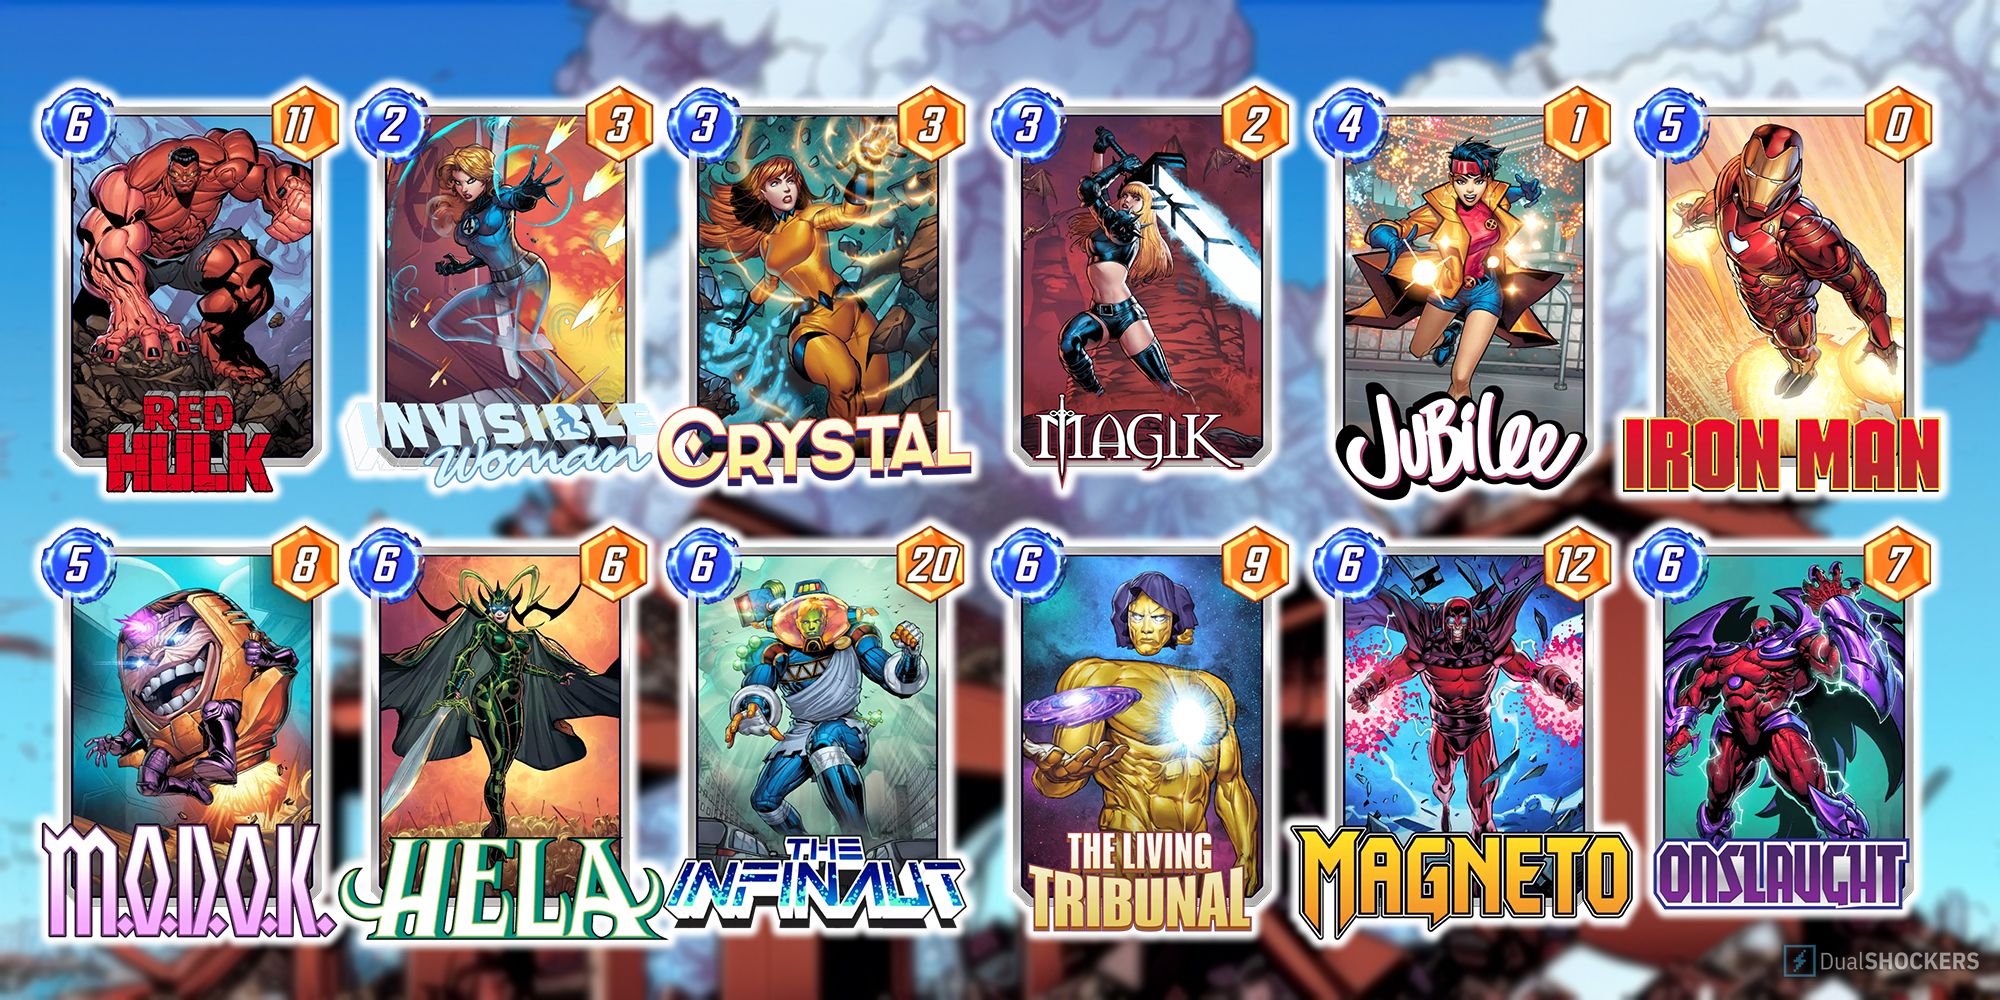 A Marvel Snap deck comprised of Red Hulk, Invisible Woman, Crystal, Magik, Jubilee, Iron Man, M.O.D.O.K., Hela, The Infinaut, The Living Tribunal, Magneto, and Onslaught.